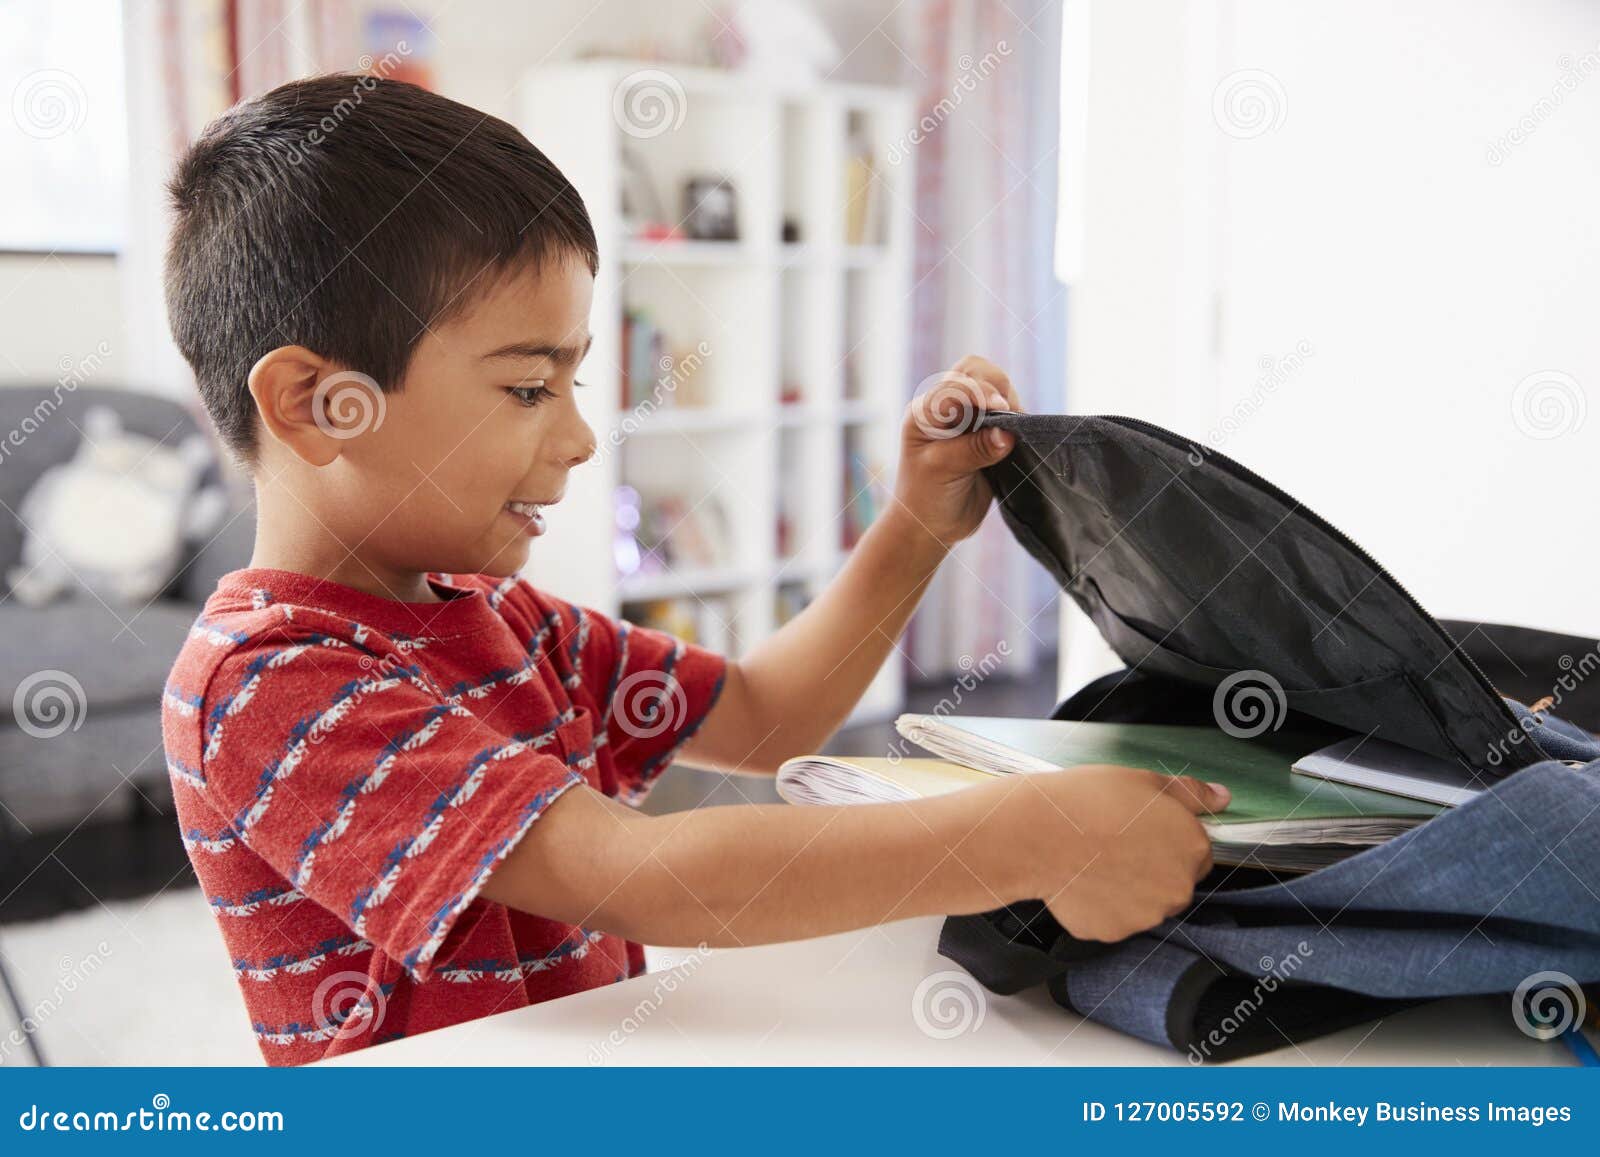 boy in bedroom packing bag ready for school